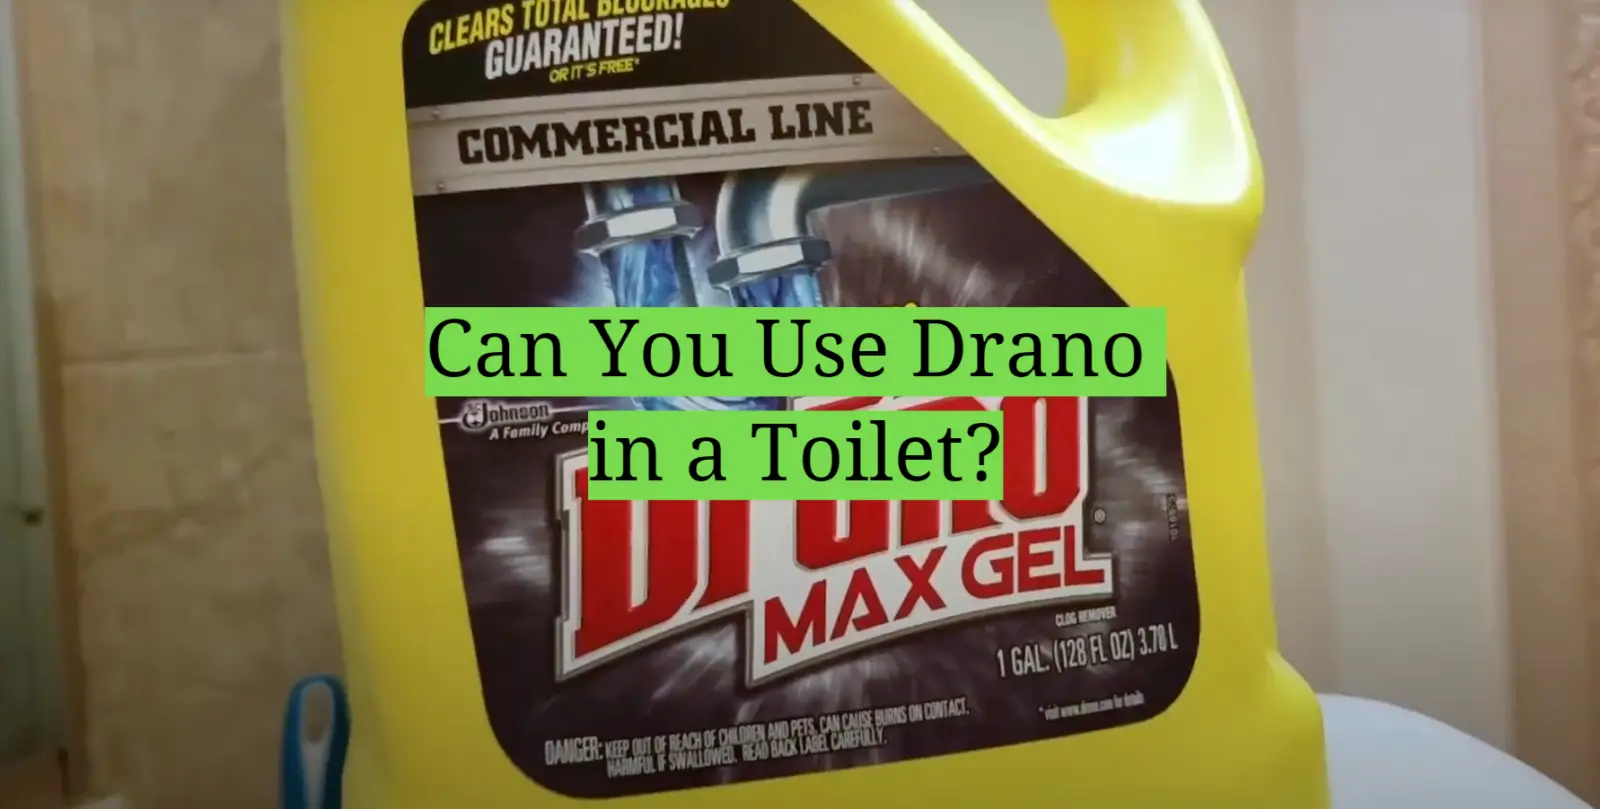 Can You Use Drano in a Toilet?